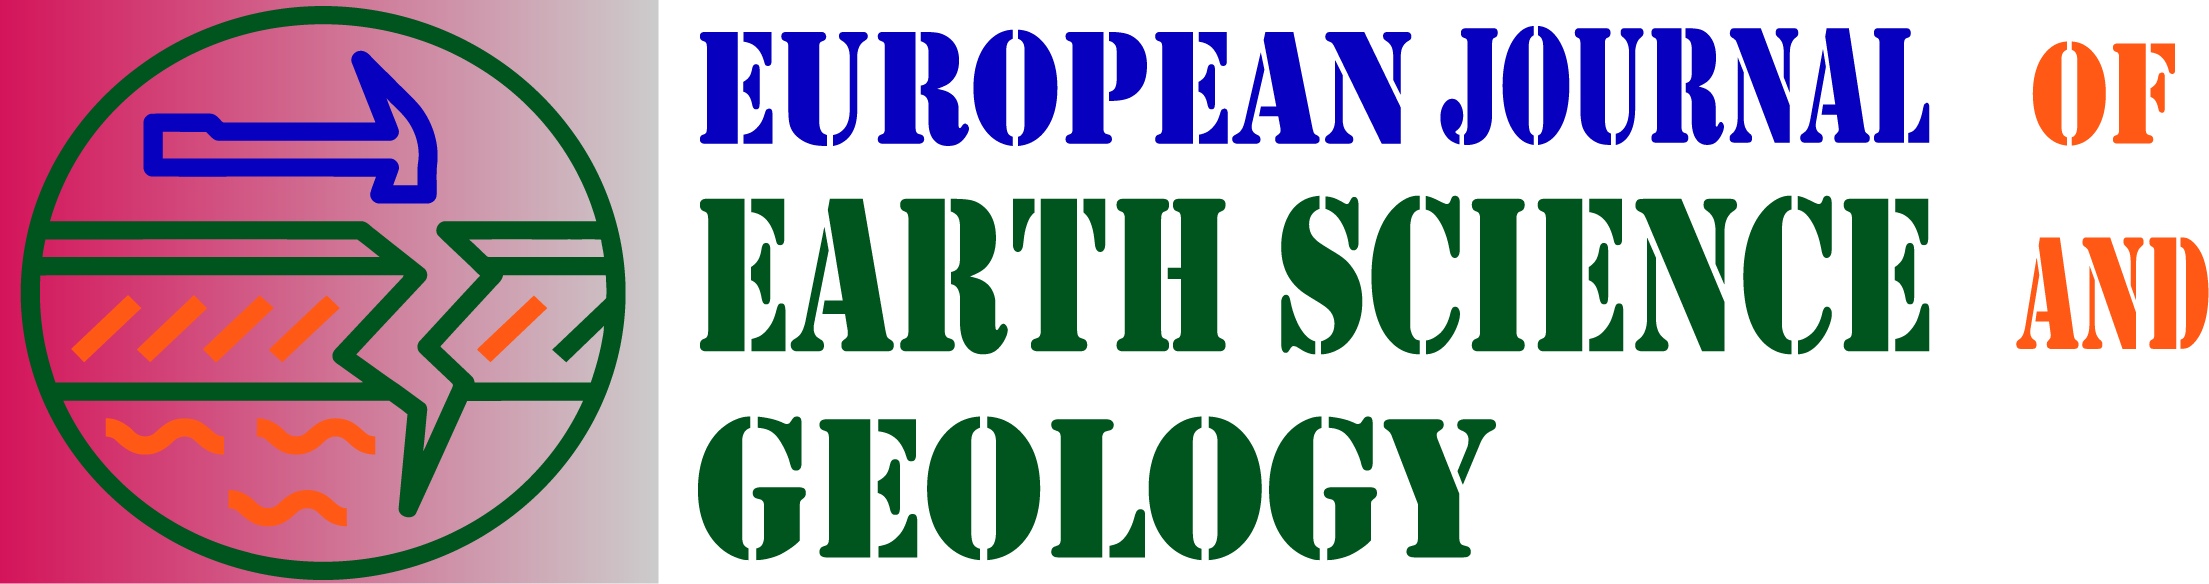 European Journal of Earth Science and Geology (EJESG)